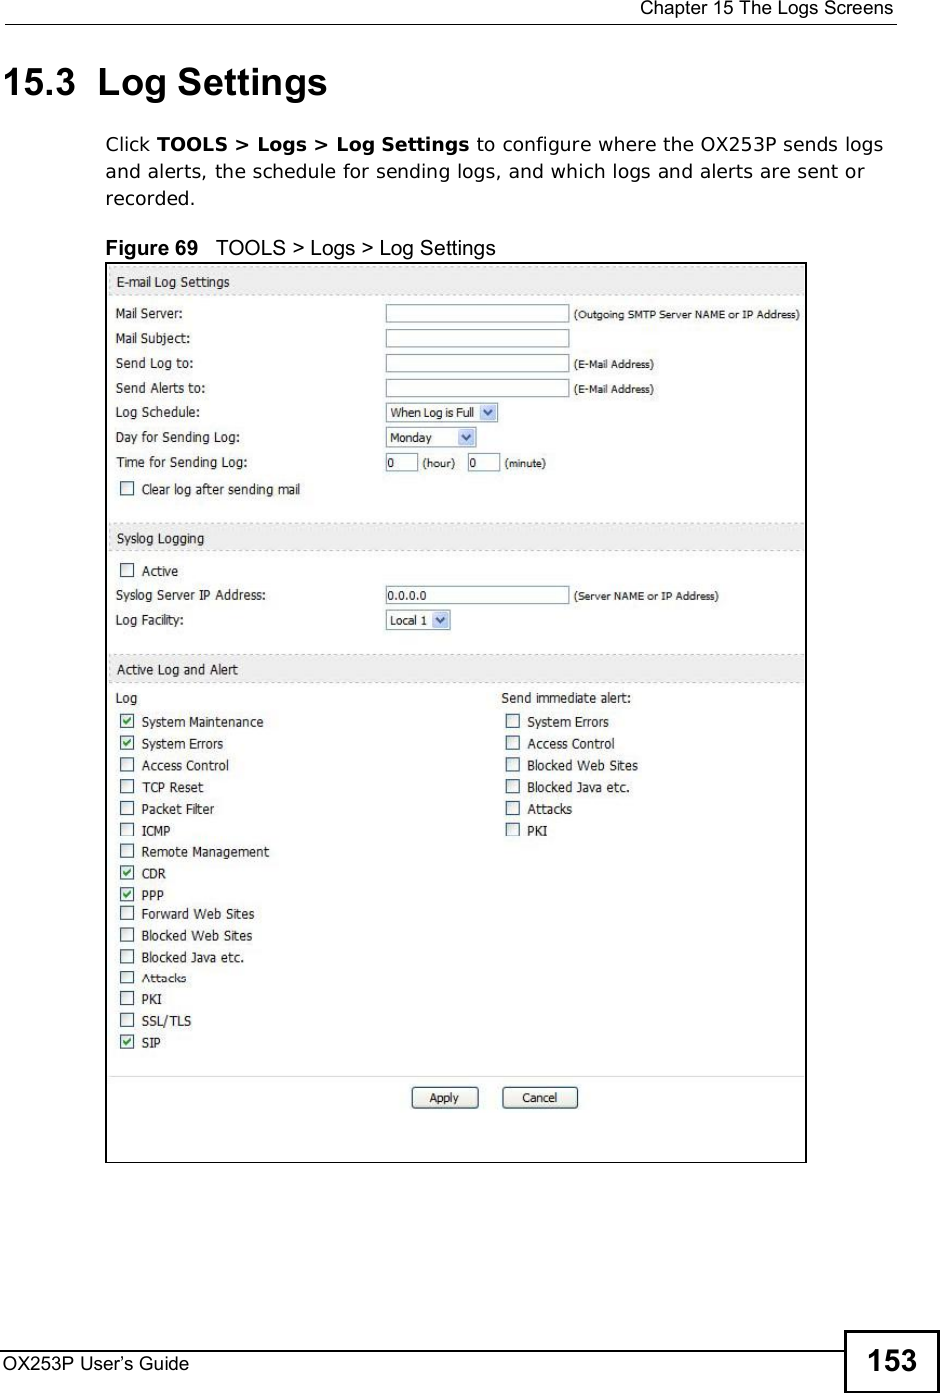  Chapter 15The Logs ScreensOX253P User’s Guide 15315.3  Log SettingsClick TOOLS &gt; Logs &gt; Log Settings to configure where the OX253P sends logs and alerts, the schedule for sending logs, and which logs and alerts are sent or recorded.Figure 69   TOOLS &gt; Logs &gt; Log Settings